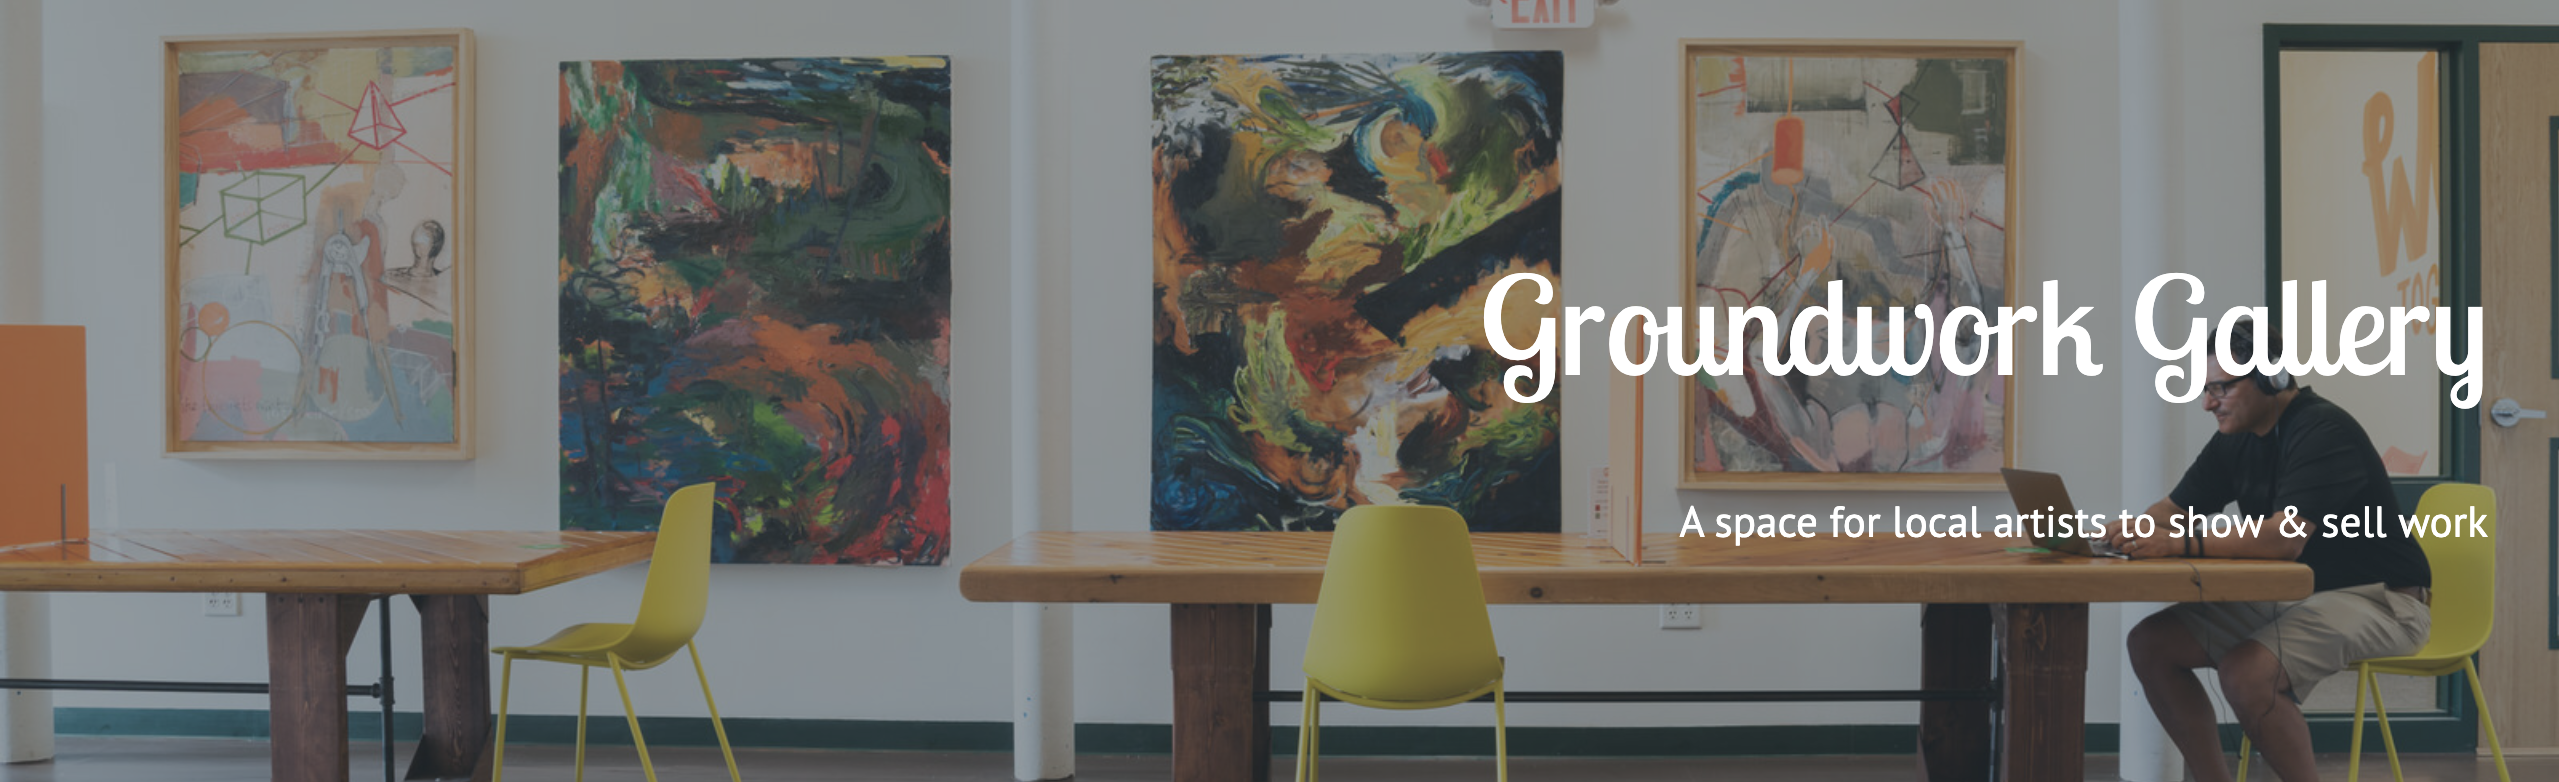 Groundwork Gallery website call for art submission page